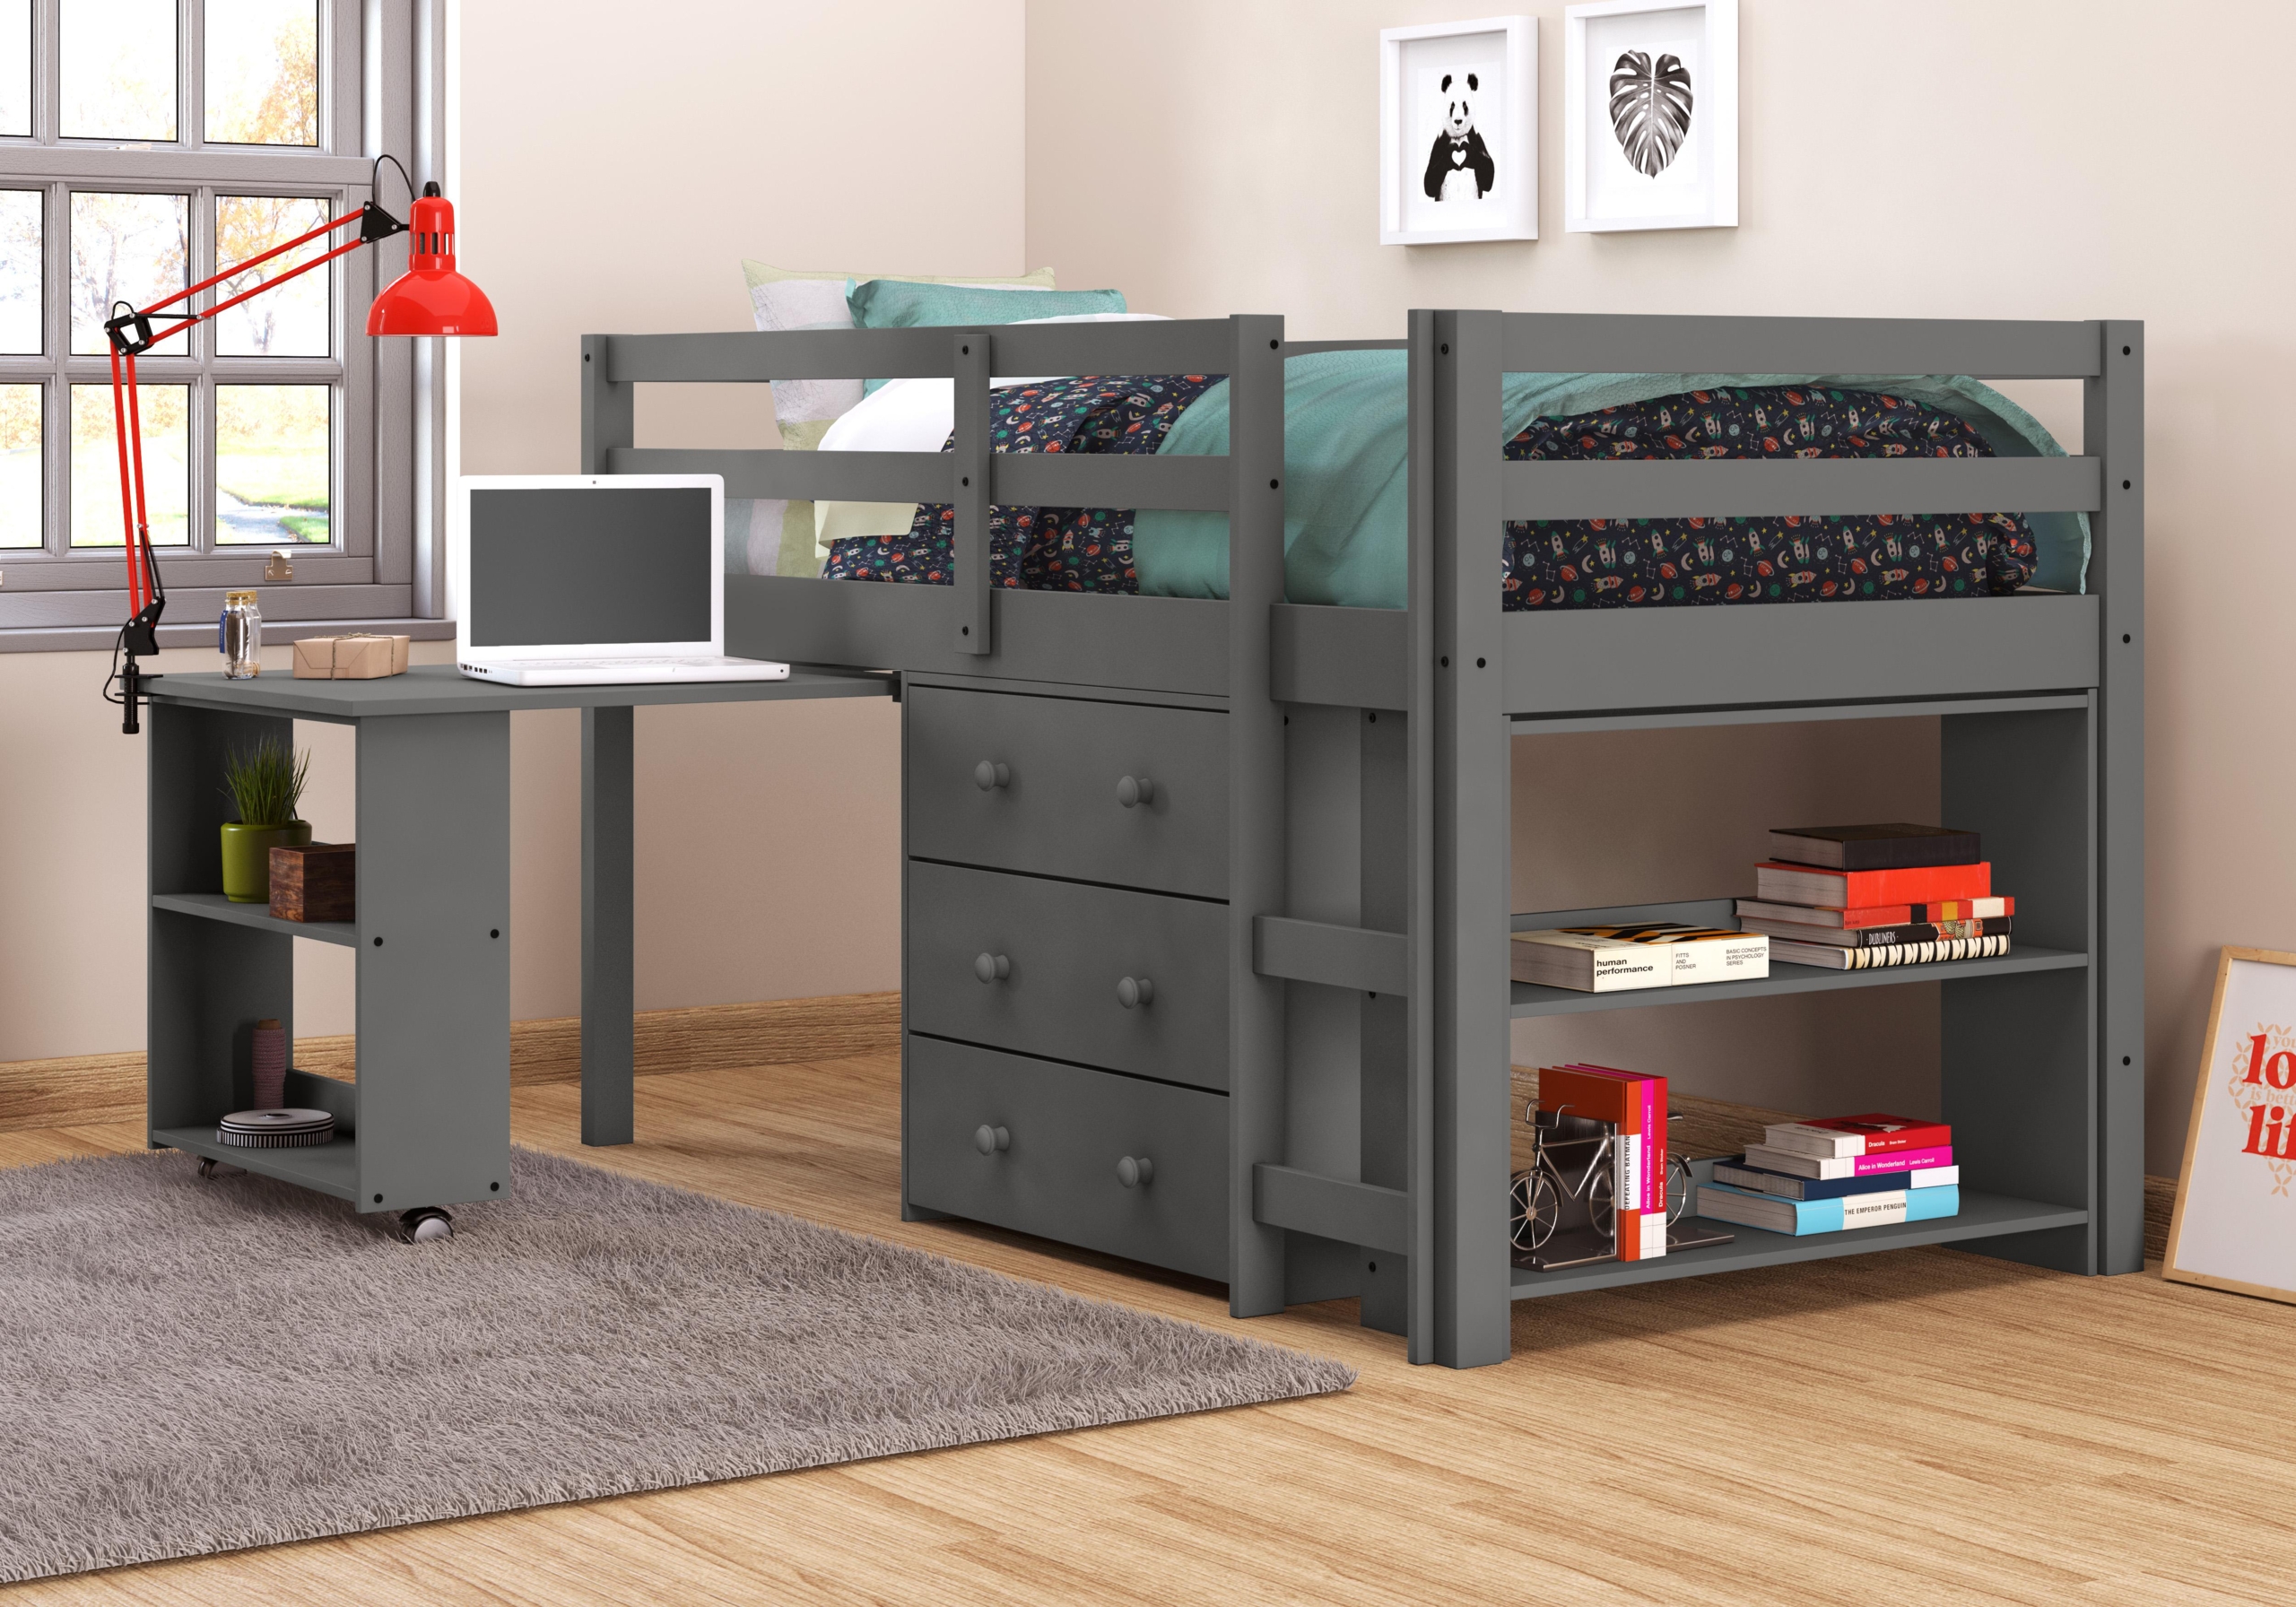 Bunk Beds With Dressers Visualhunt, Bunk Bed With Dresser